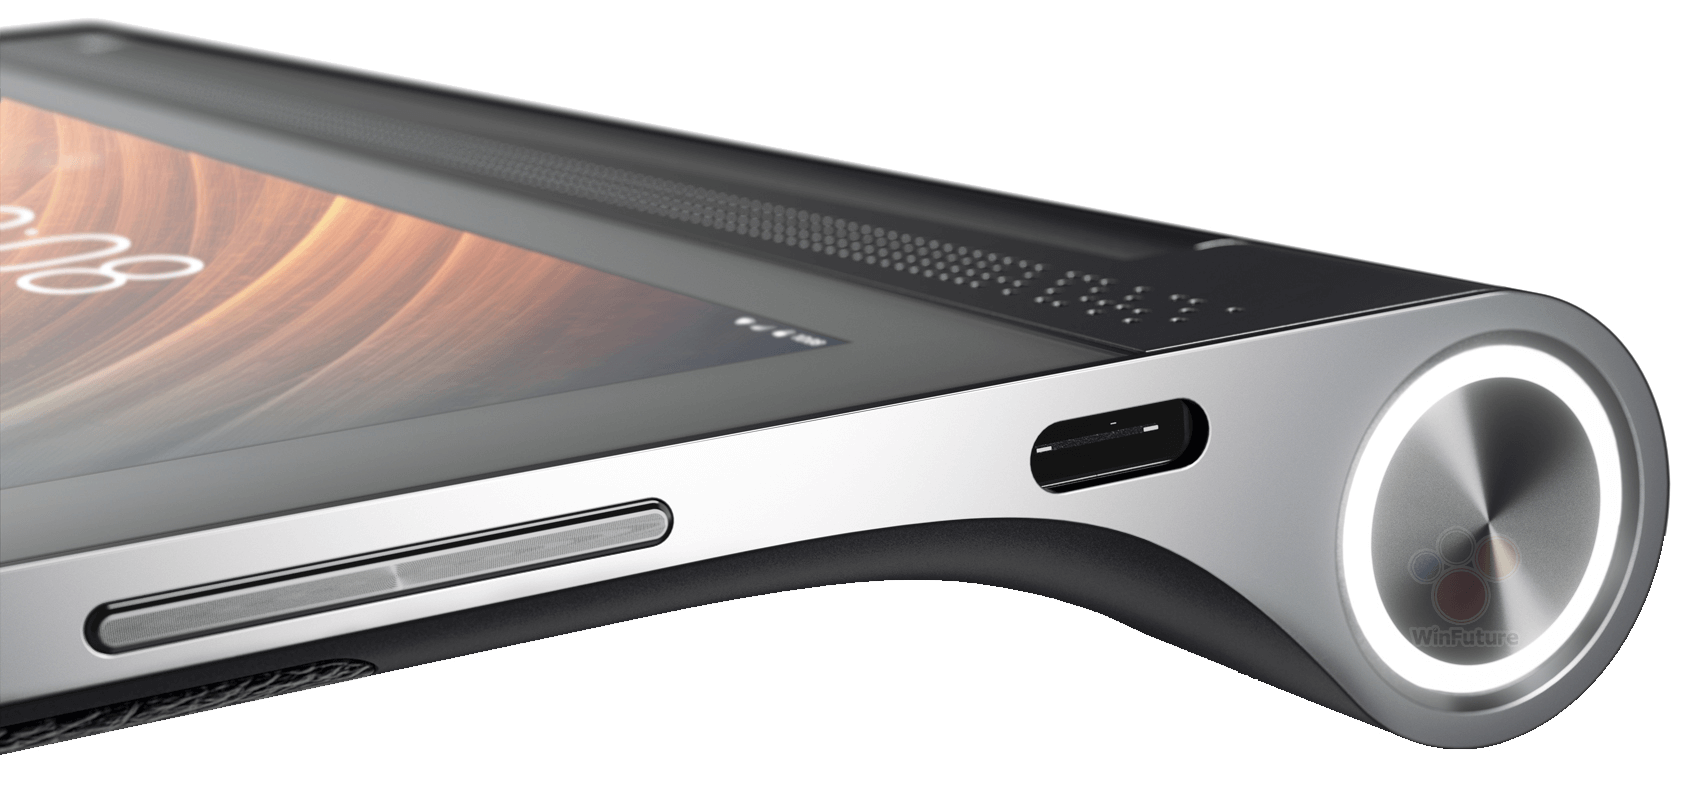 The Lenovo Yoga Tab 13 is on the way in 2021, according to new leaks - NotebookCheck.net News